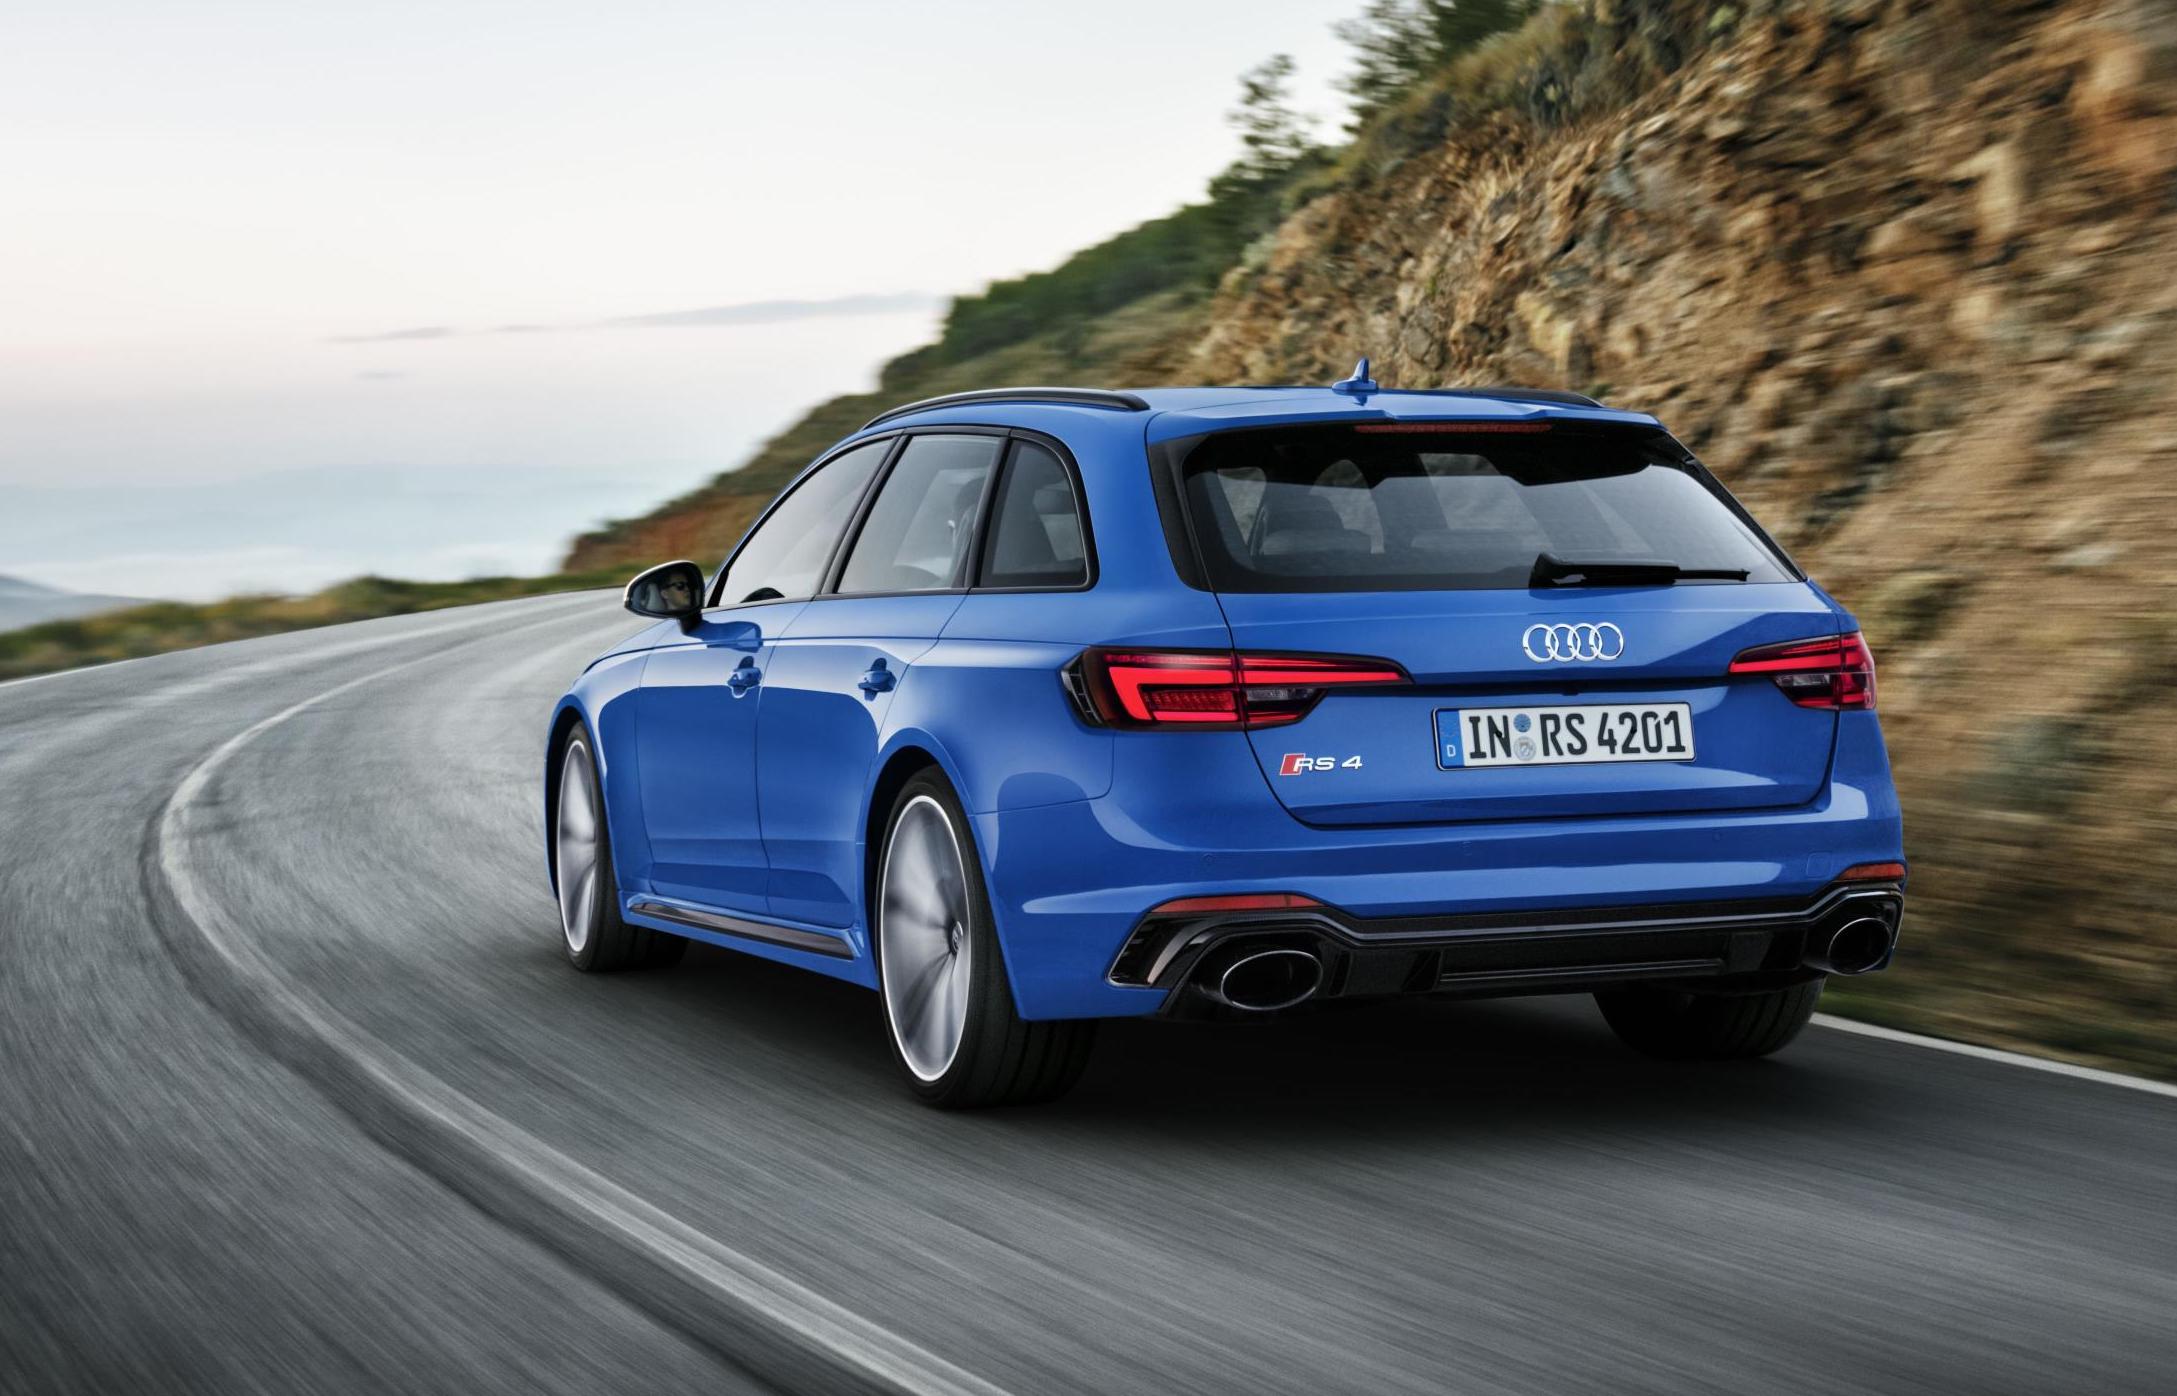 Scorching new Audi RS4 Avant uncovered with 444bhp